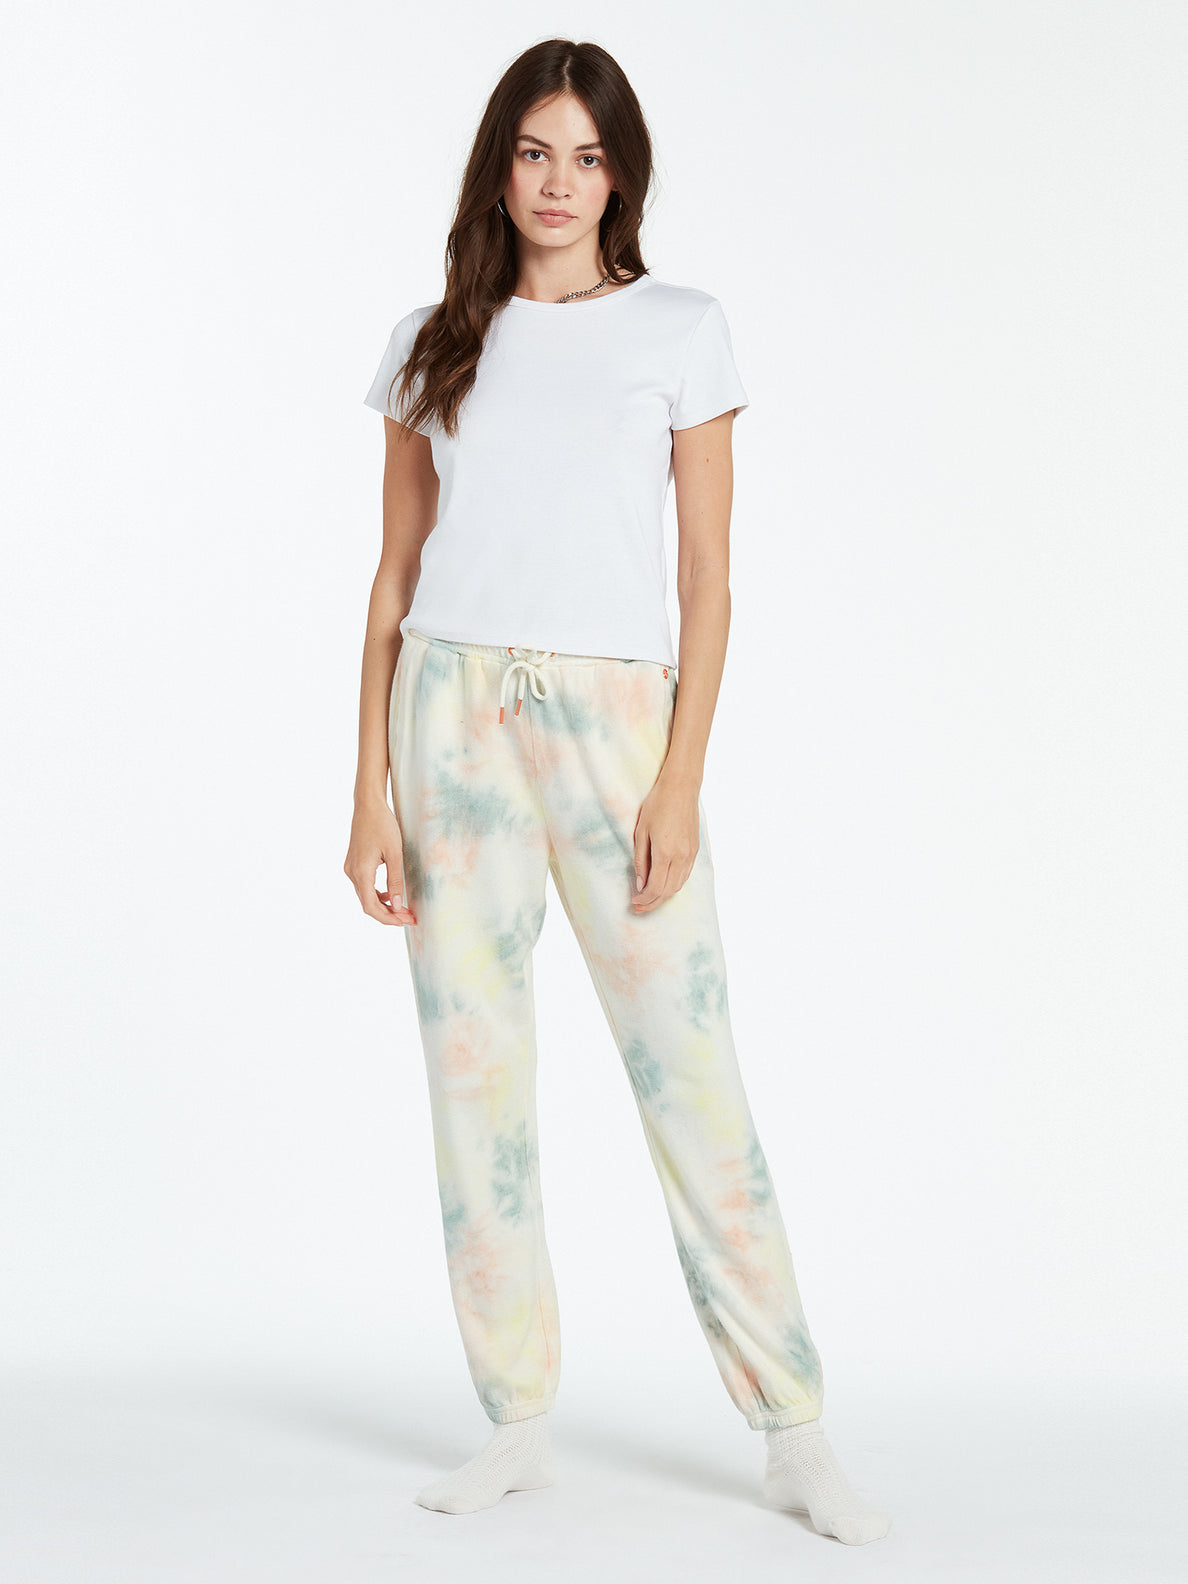 Lived In Lounge Fleece Pant - Multi (B1212104_MLT) [F]